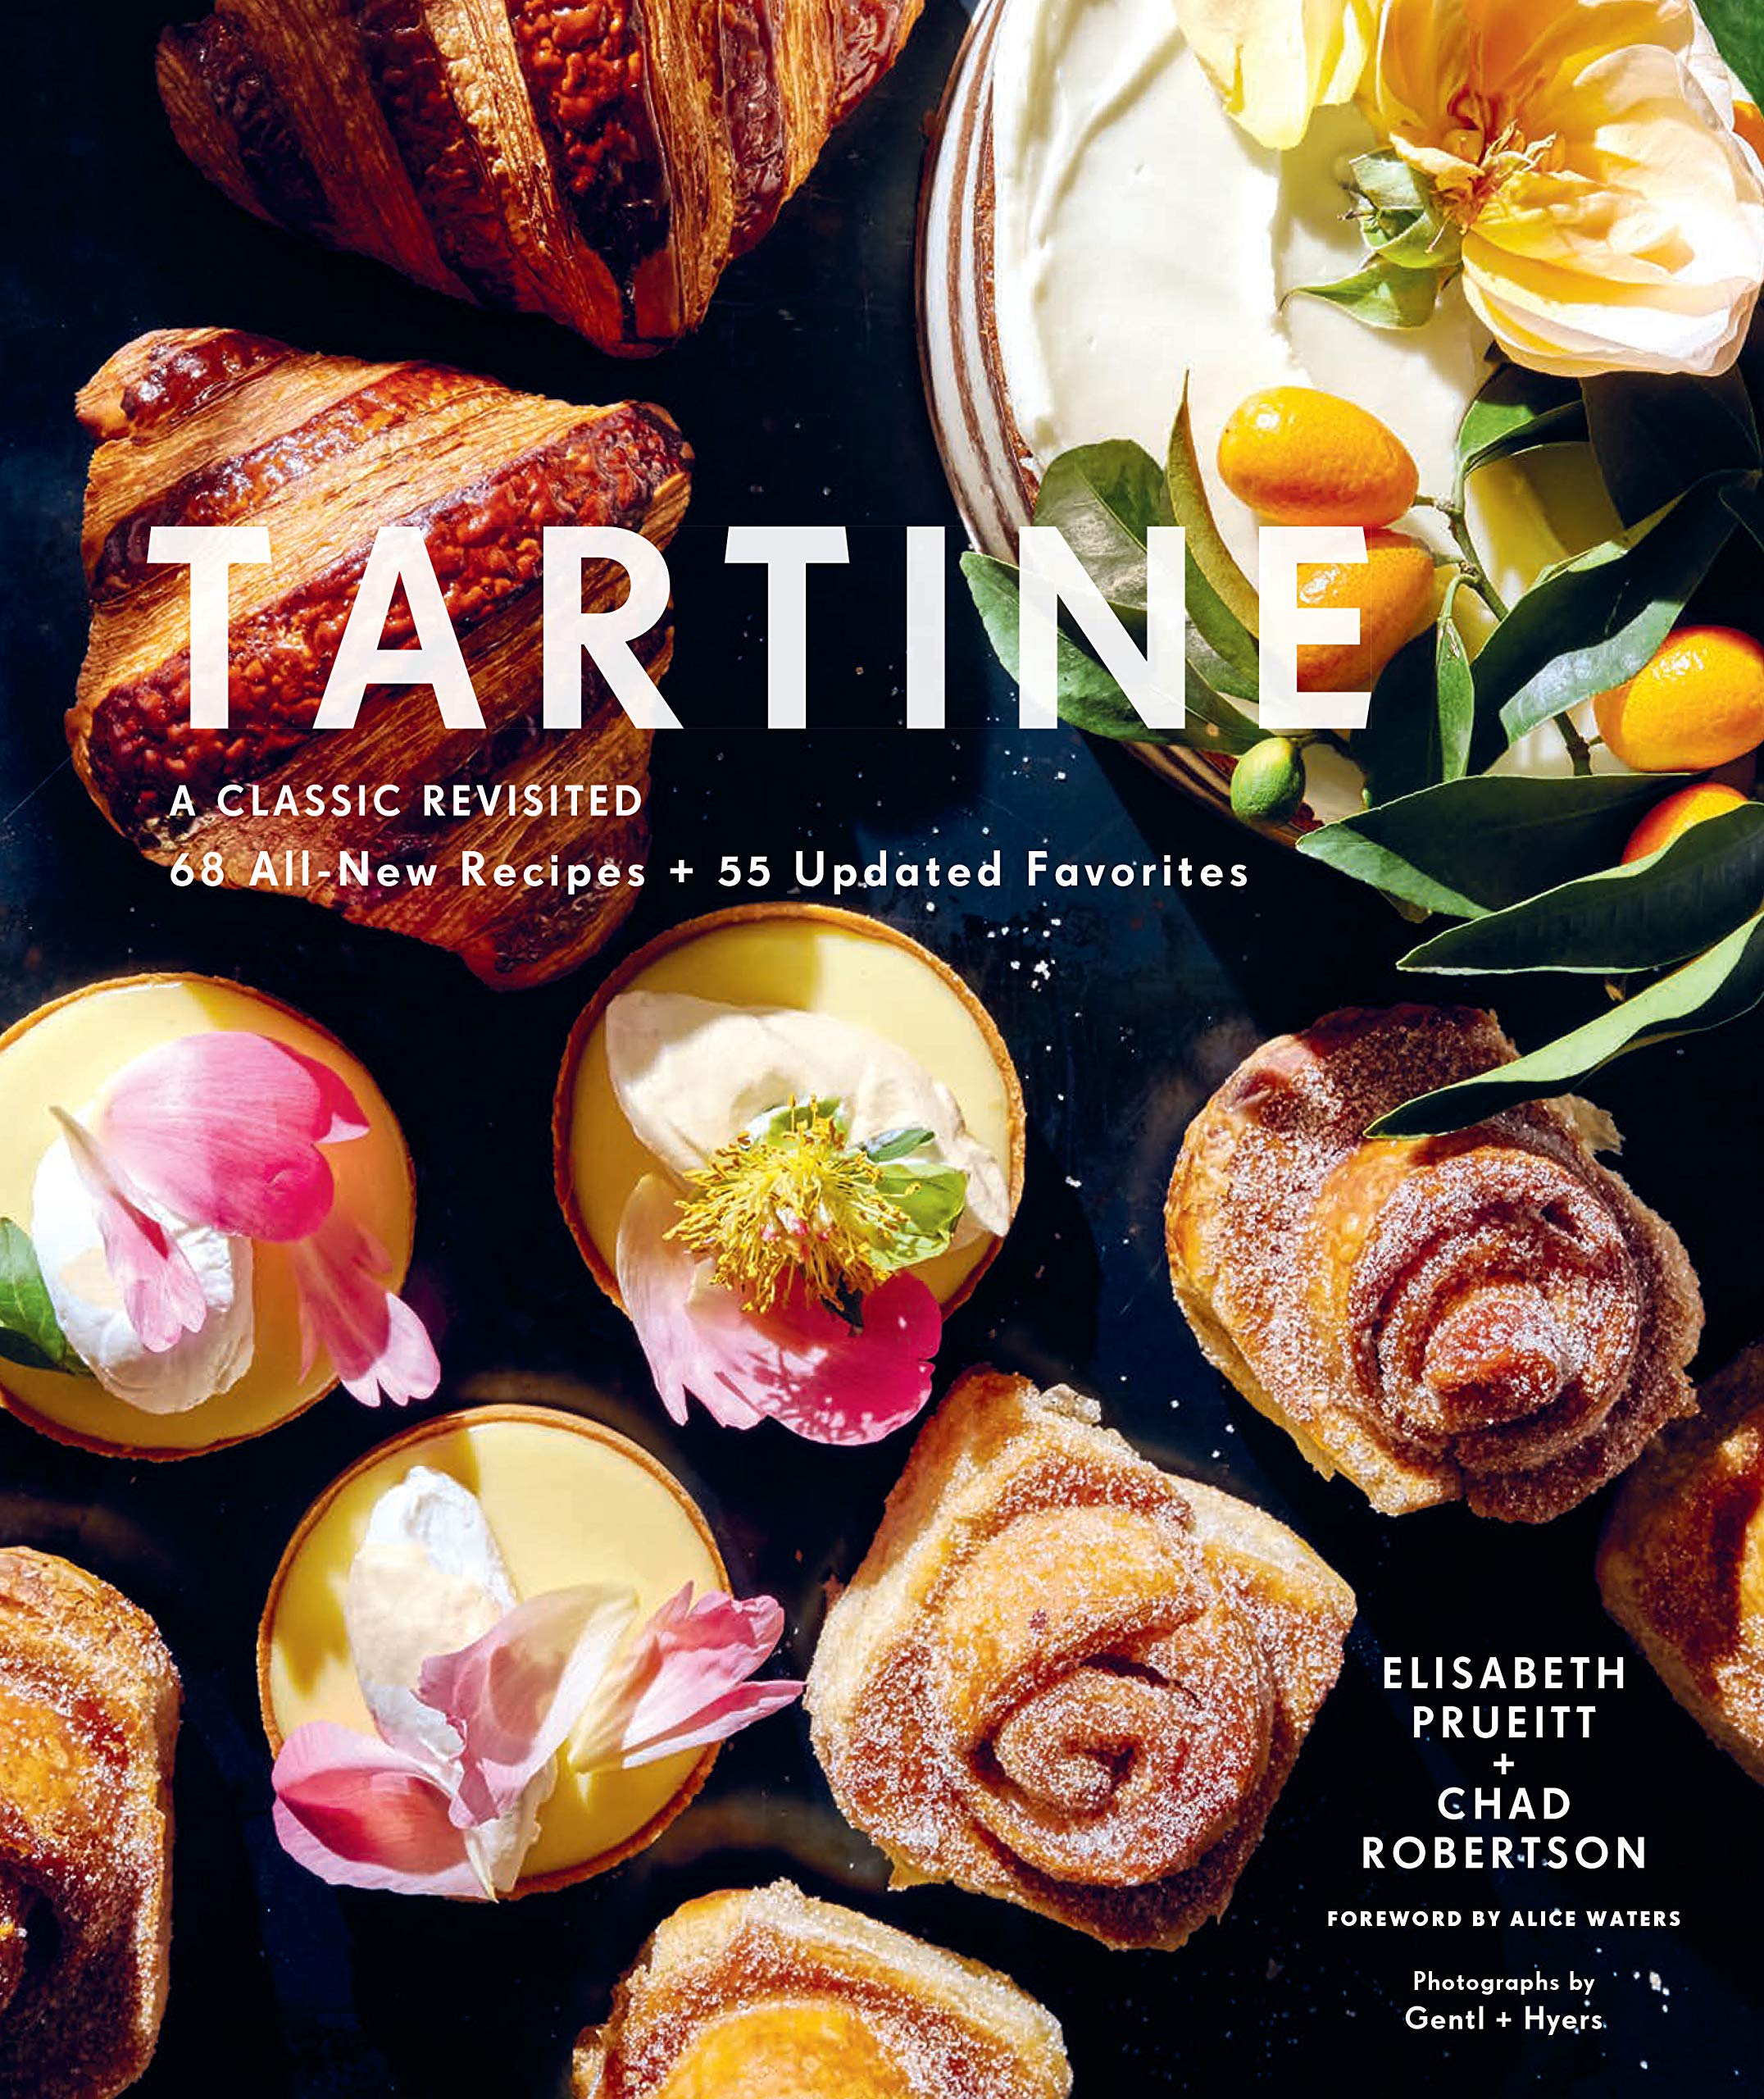 Tartine: Revised Edition: A Classic Revisited: 68 All-New Recipes + 55 Updated Favorites (Elisabeth Prueitt)